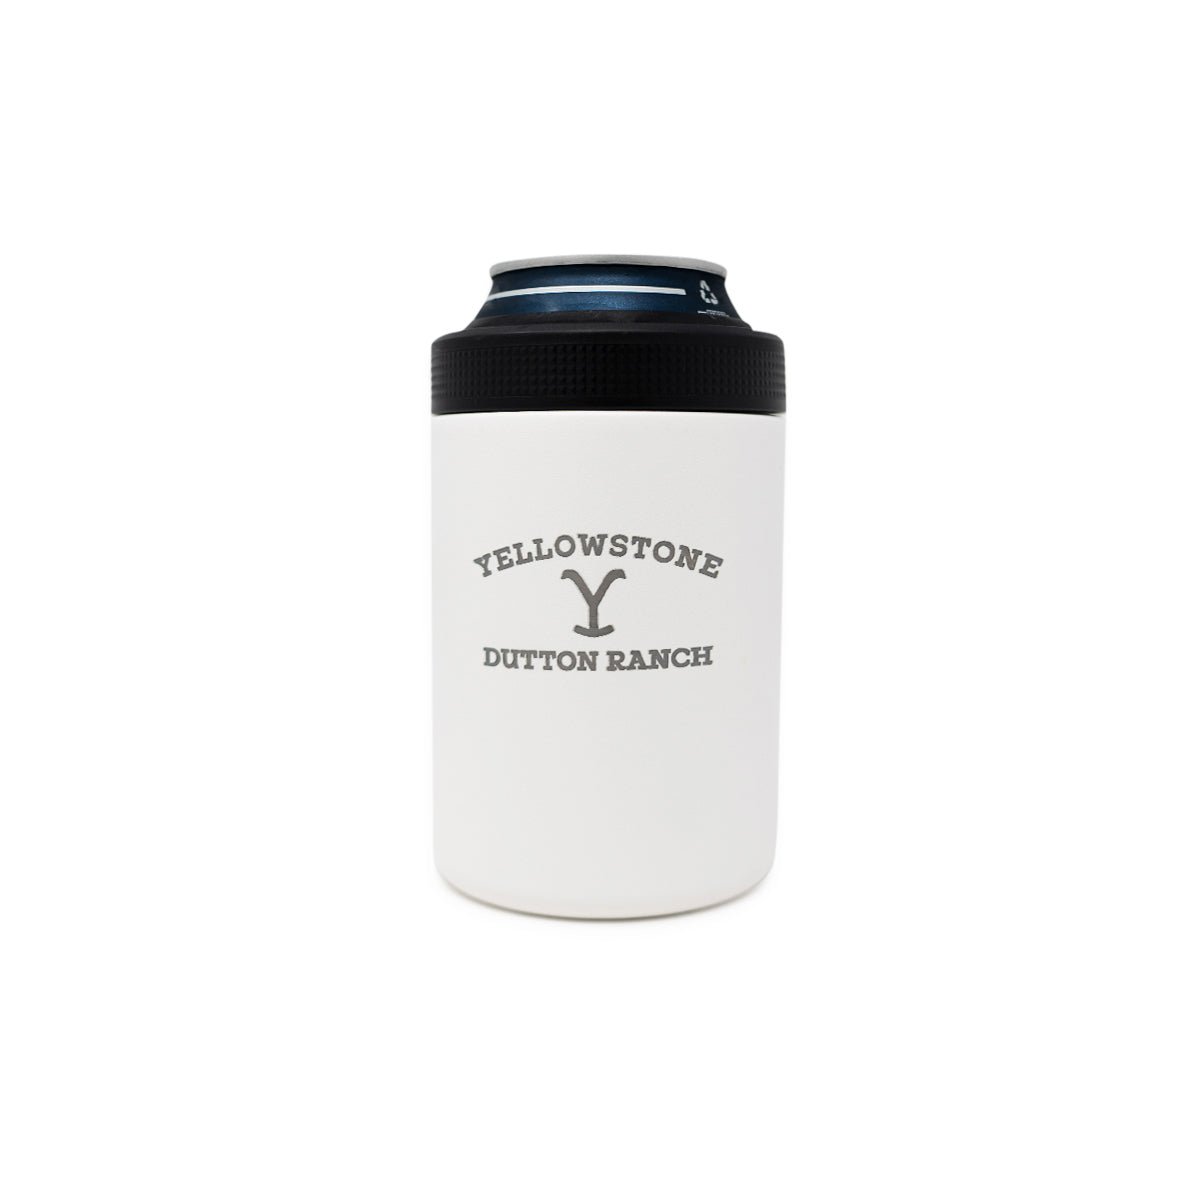 Yellowstone Dutton Ranch Logo Insulated Can Koozie - Paramount Shop